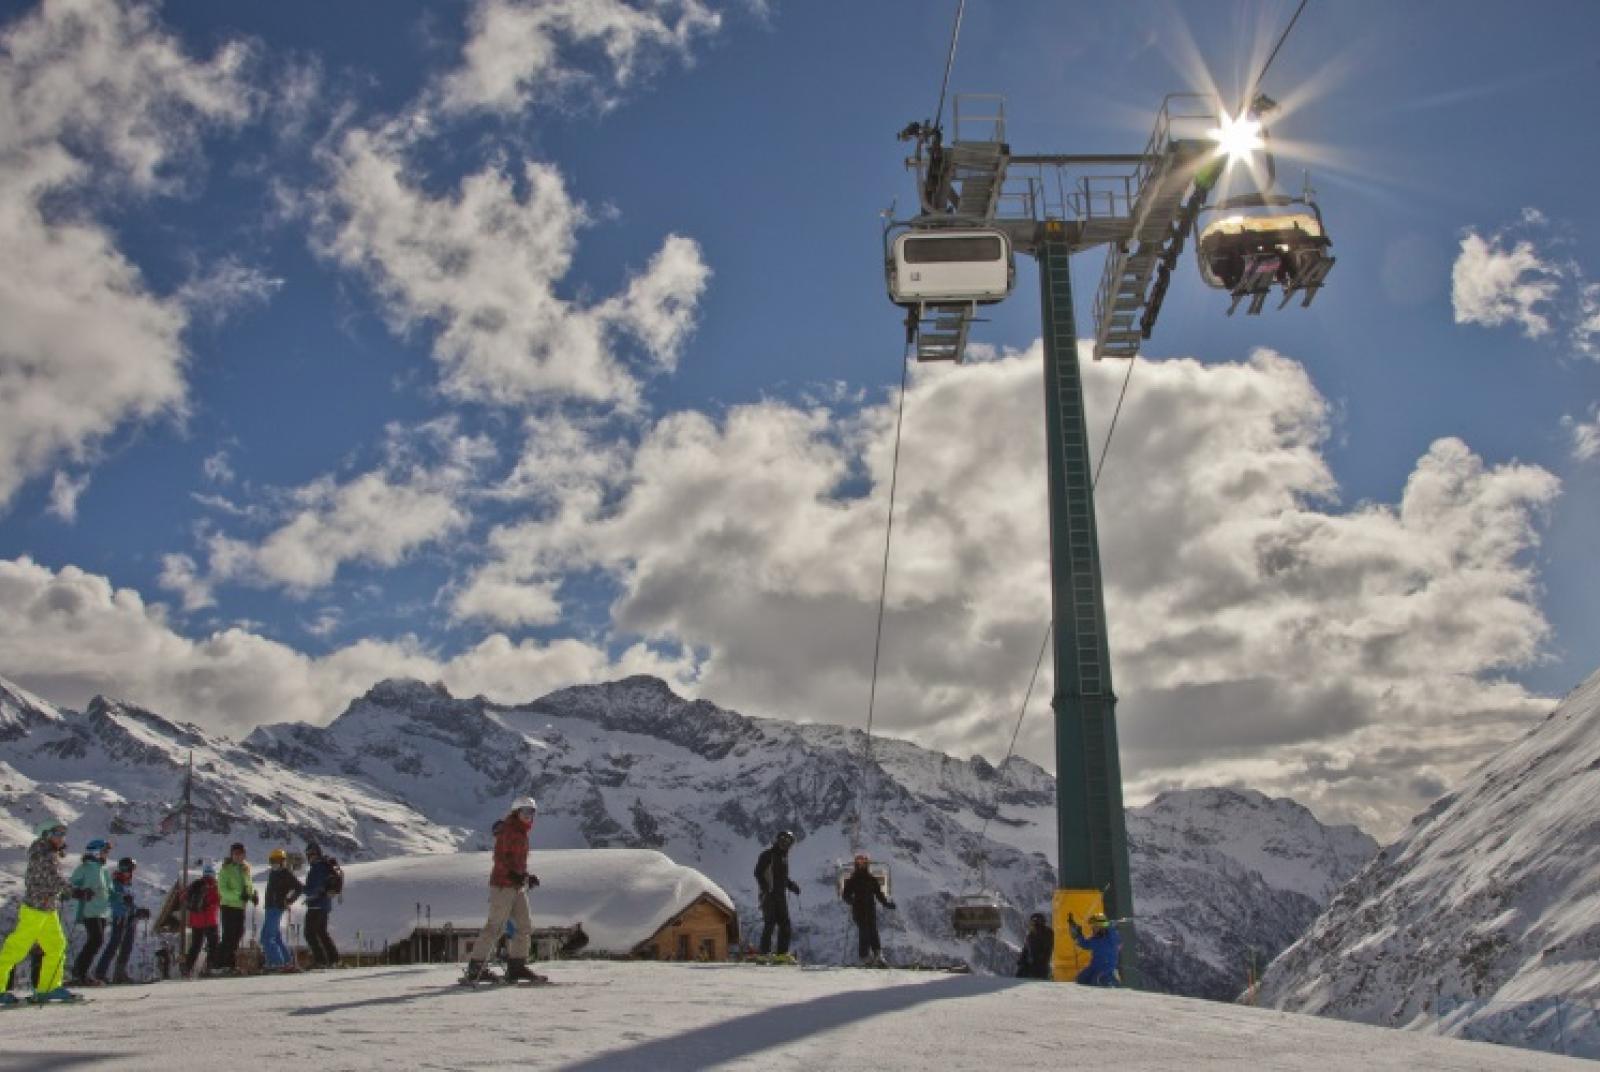 Monterosa Ski Seasonal Passes: now available online and at ticket offices